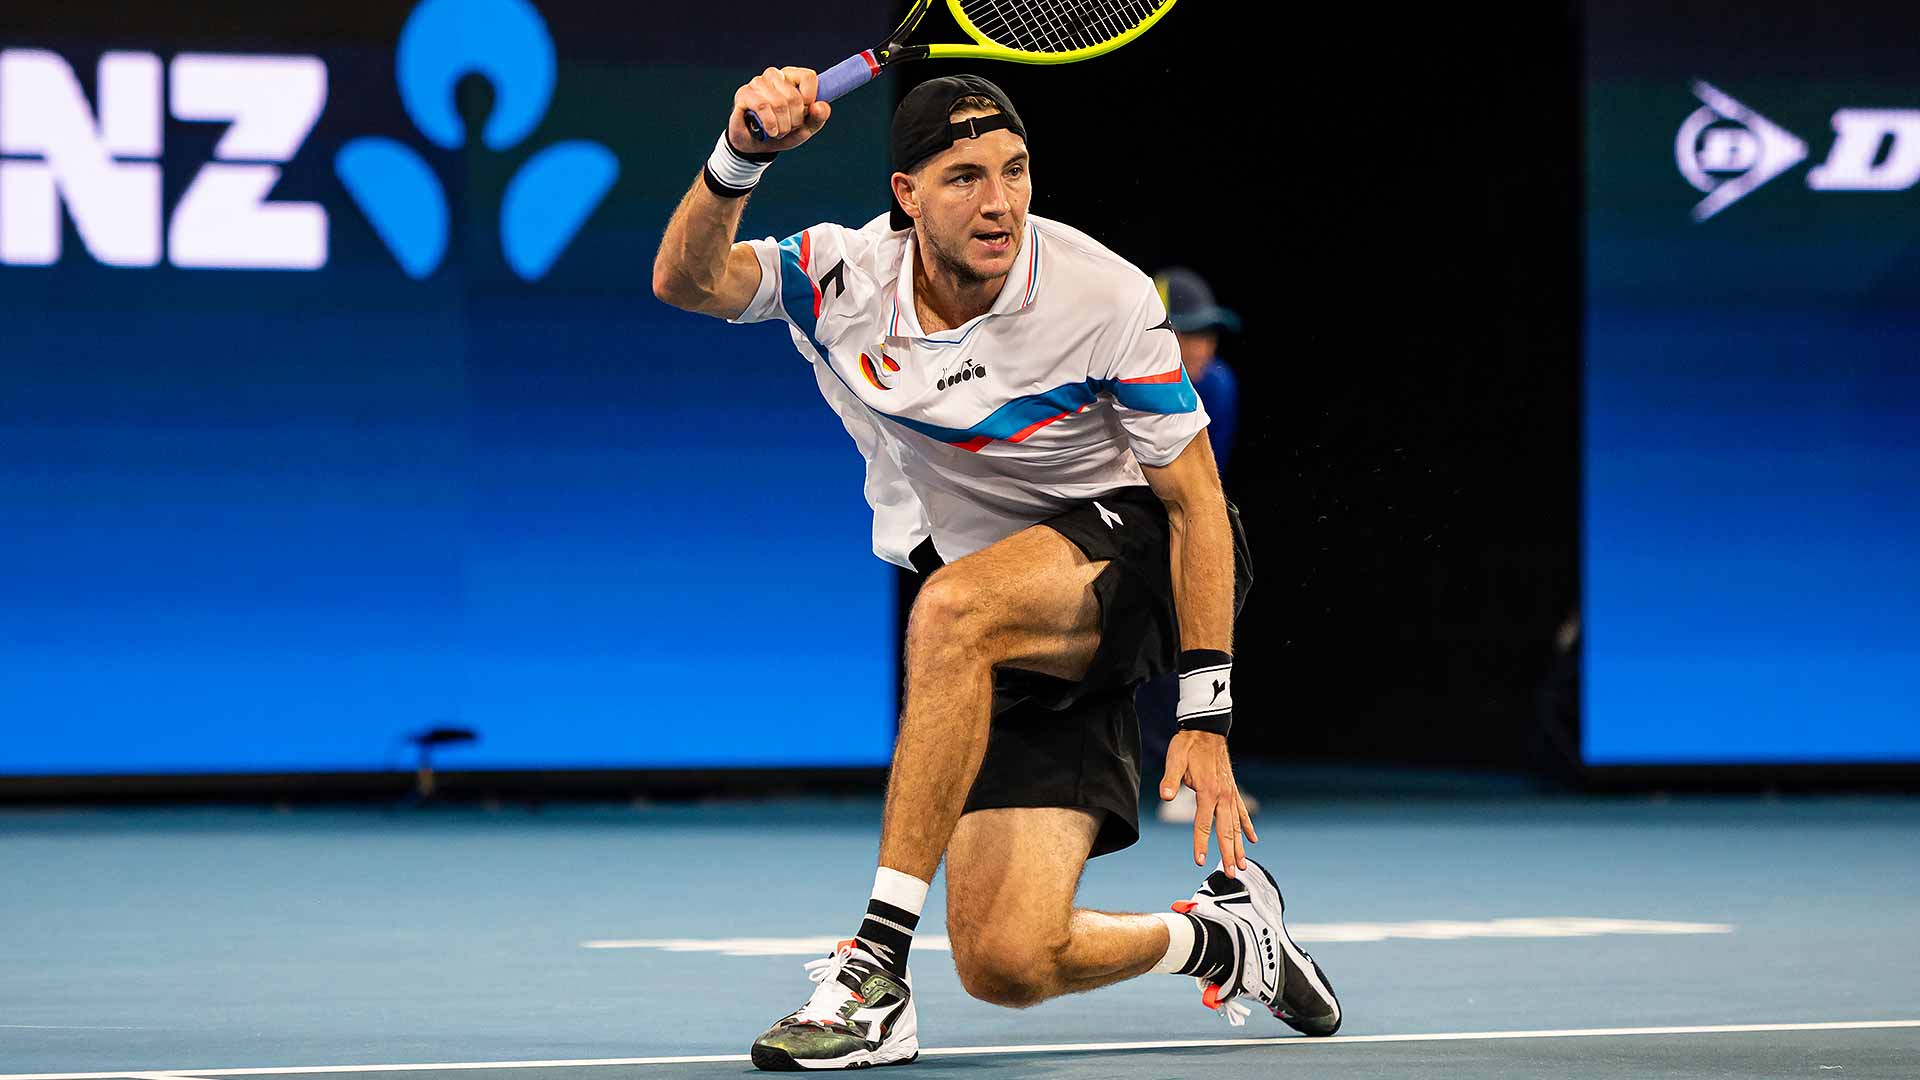 <a href='https://www.atptour.com/en/players/jan-lennard-struff/sl28/overview'>Jan-Lennard Struff</a> moves to 1-1 on the young season with a win on Sunday night in Brisbane.